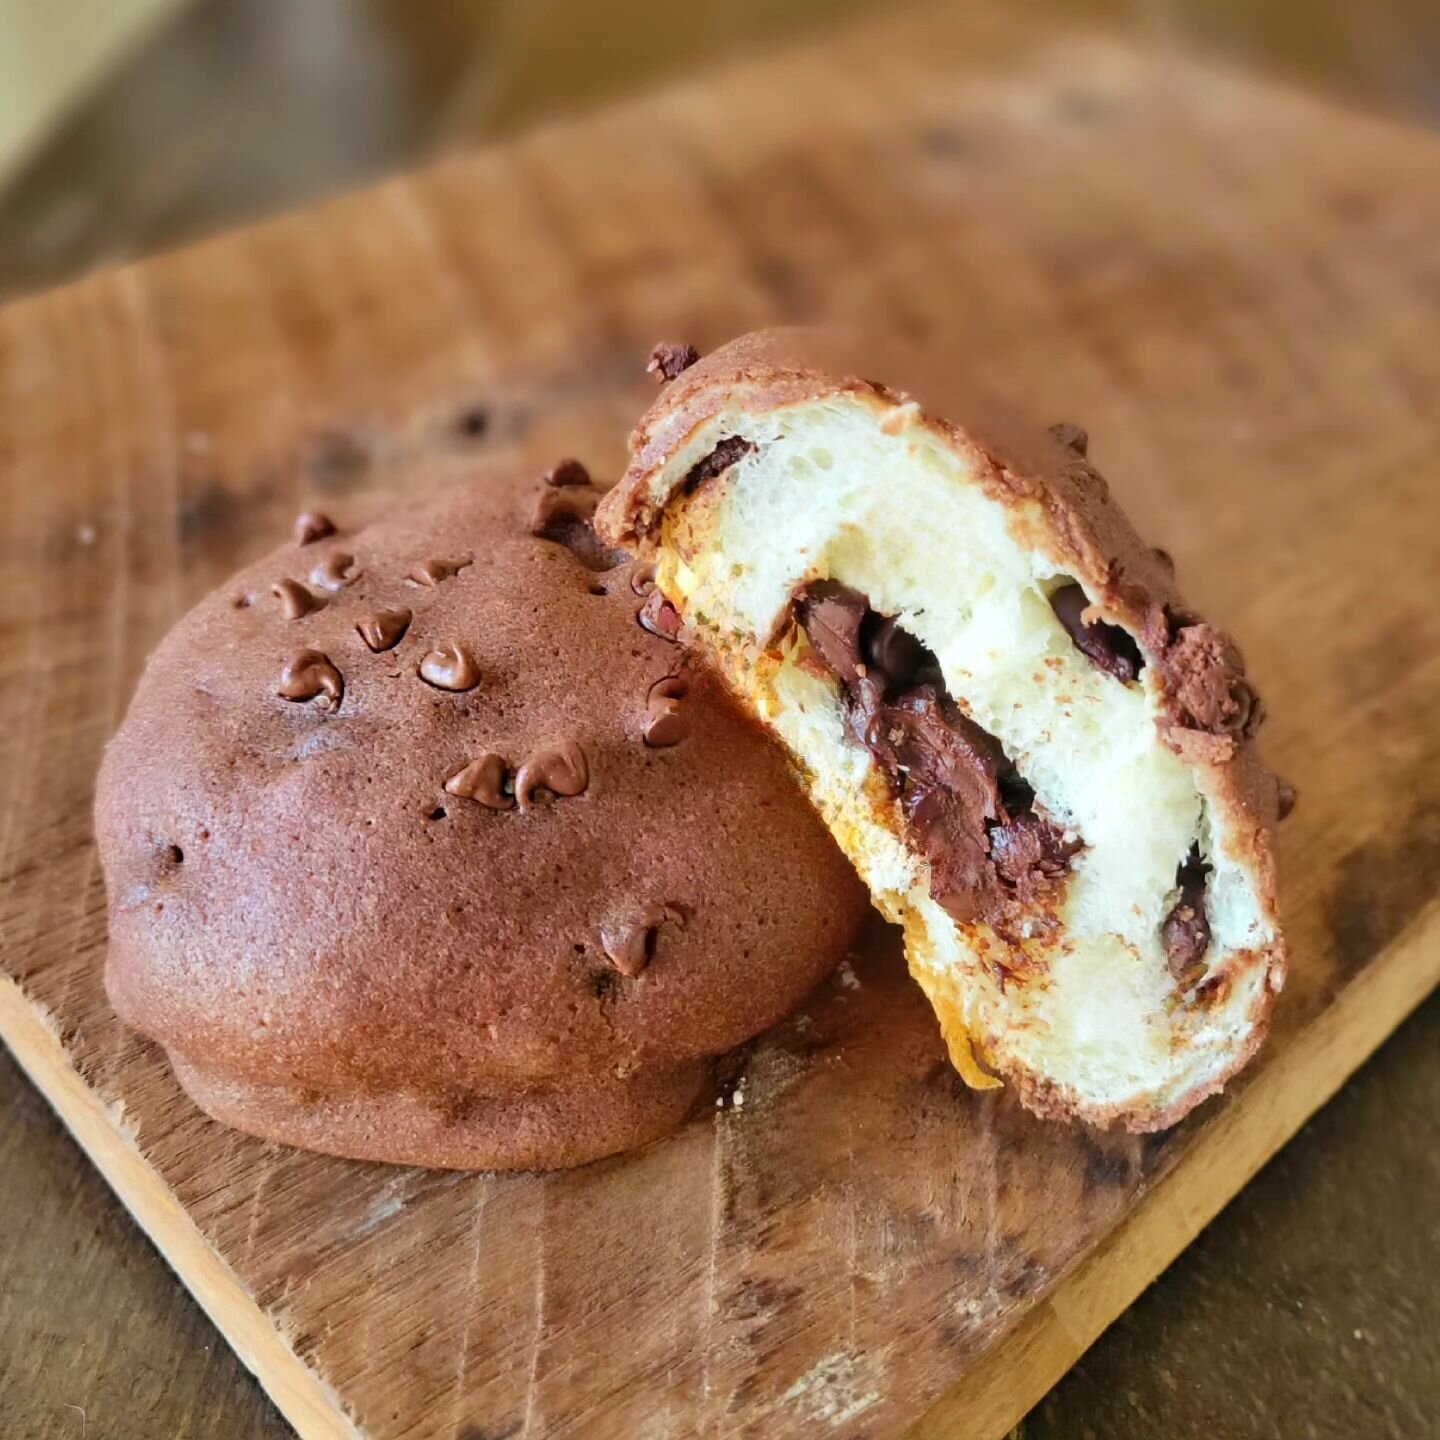 Calling all chocolate lovers out there! 🍫 We've sure got a treat for you! 😍

Le Chocolat: Soft bread rolled in chocolate chips, filled with premium chocolate (Guittard), and topped with chocolate castella.

#okayamakobo #okayamakobousa
#bringithome